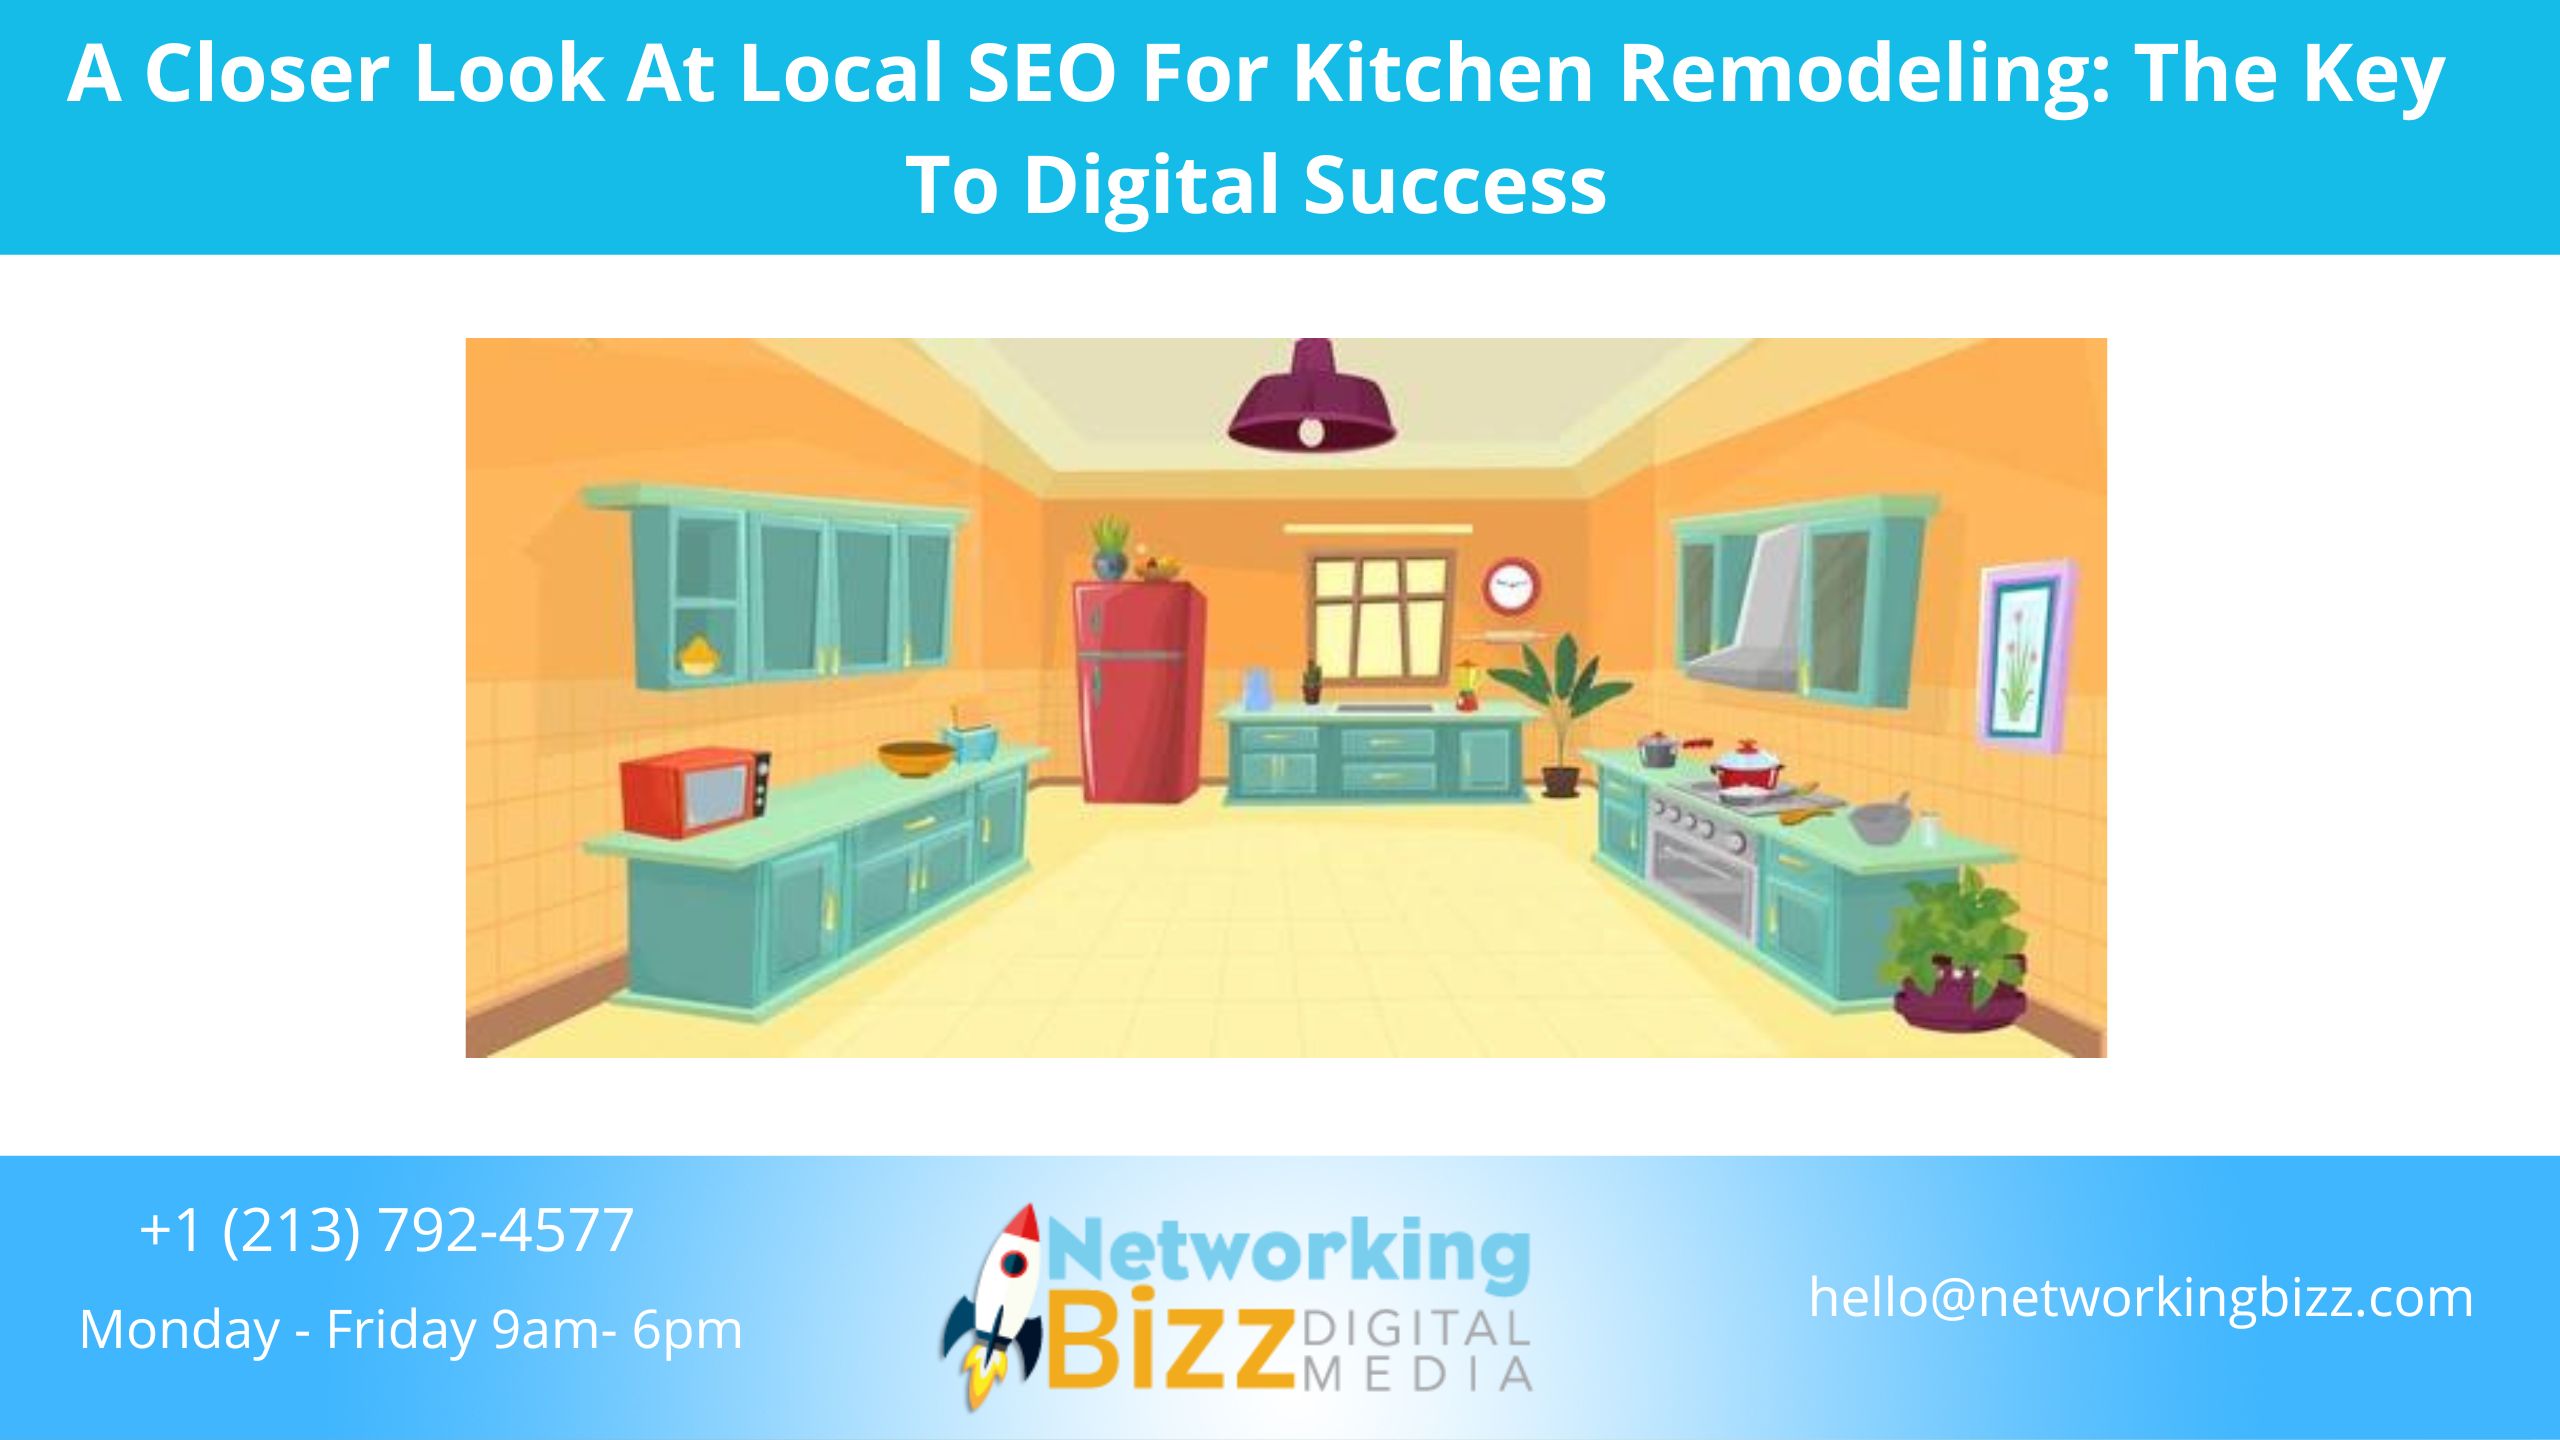 A Closer Look At Local SEO For Kitchen Remodeling: The Key To Digital Success